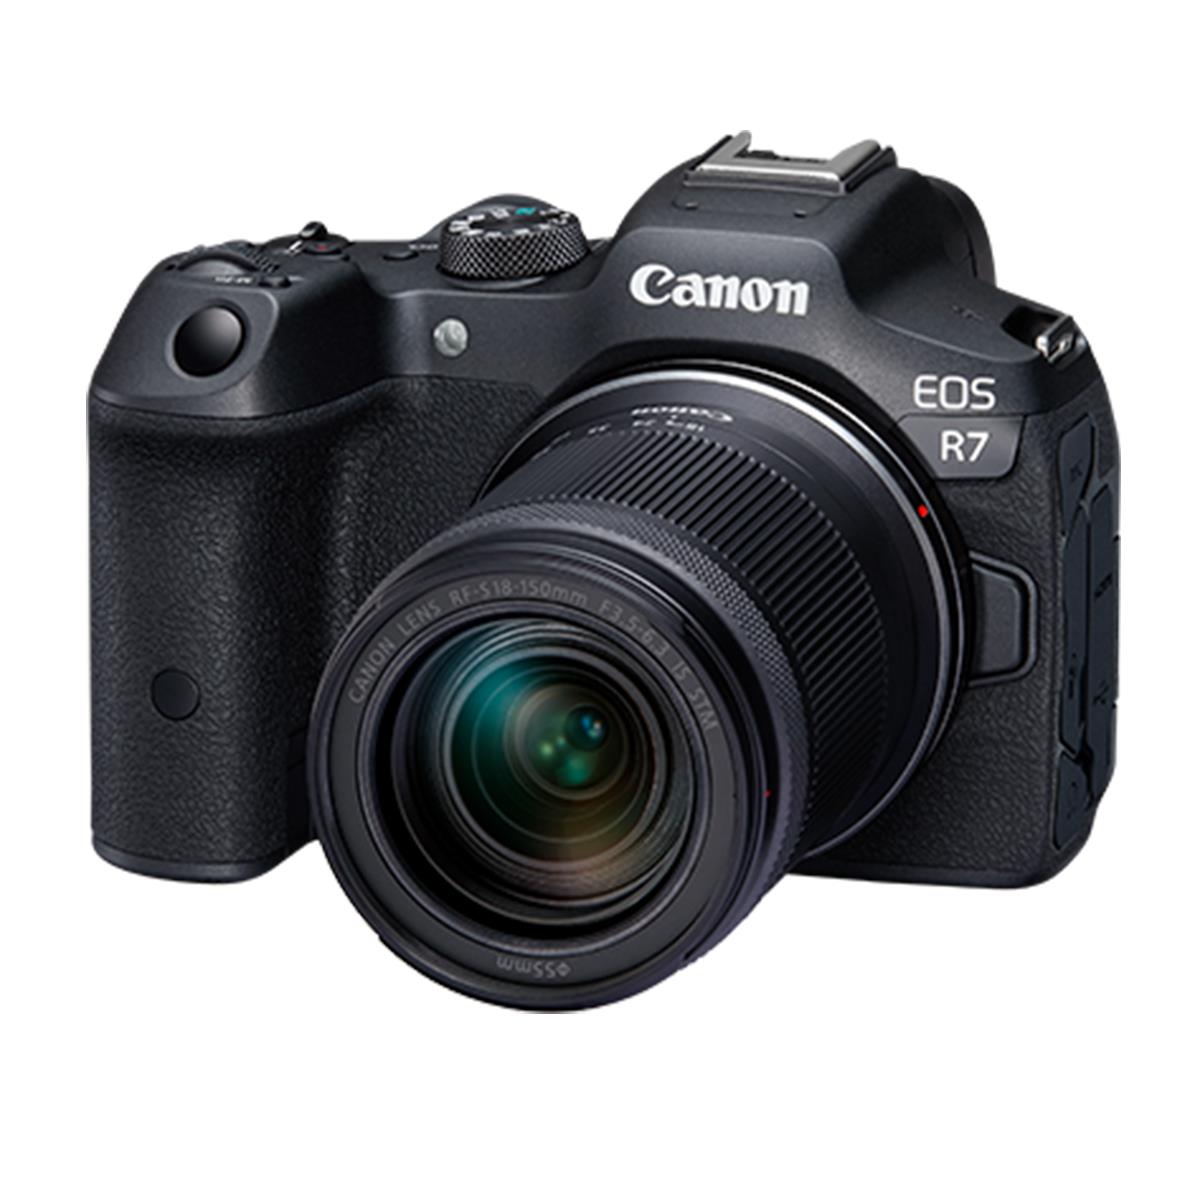 

Canon EOS R7 Mirrorless Digital Camera with RF-S 18-150mm f/3.5-6.3 IS STM Lens